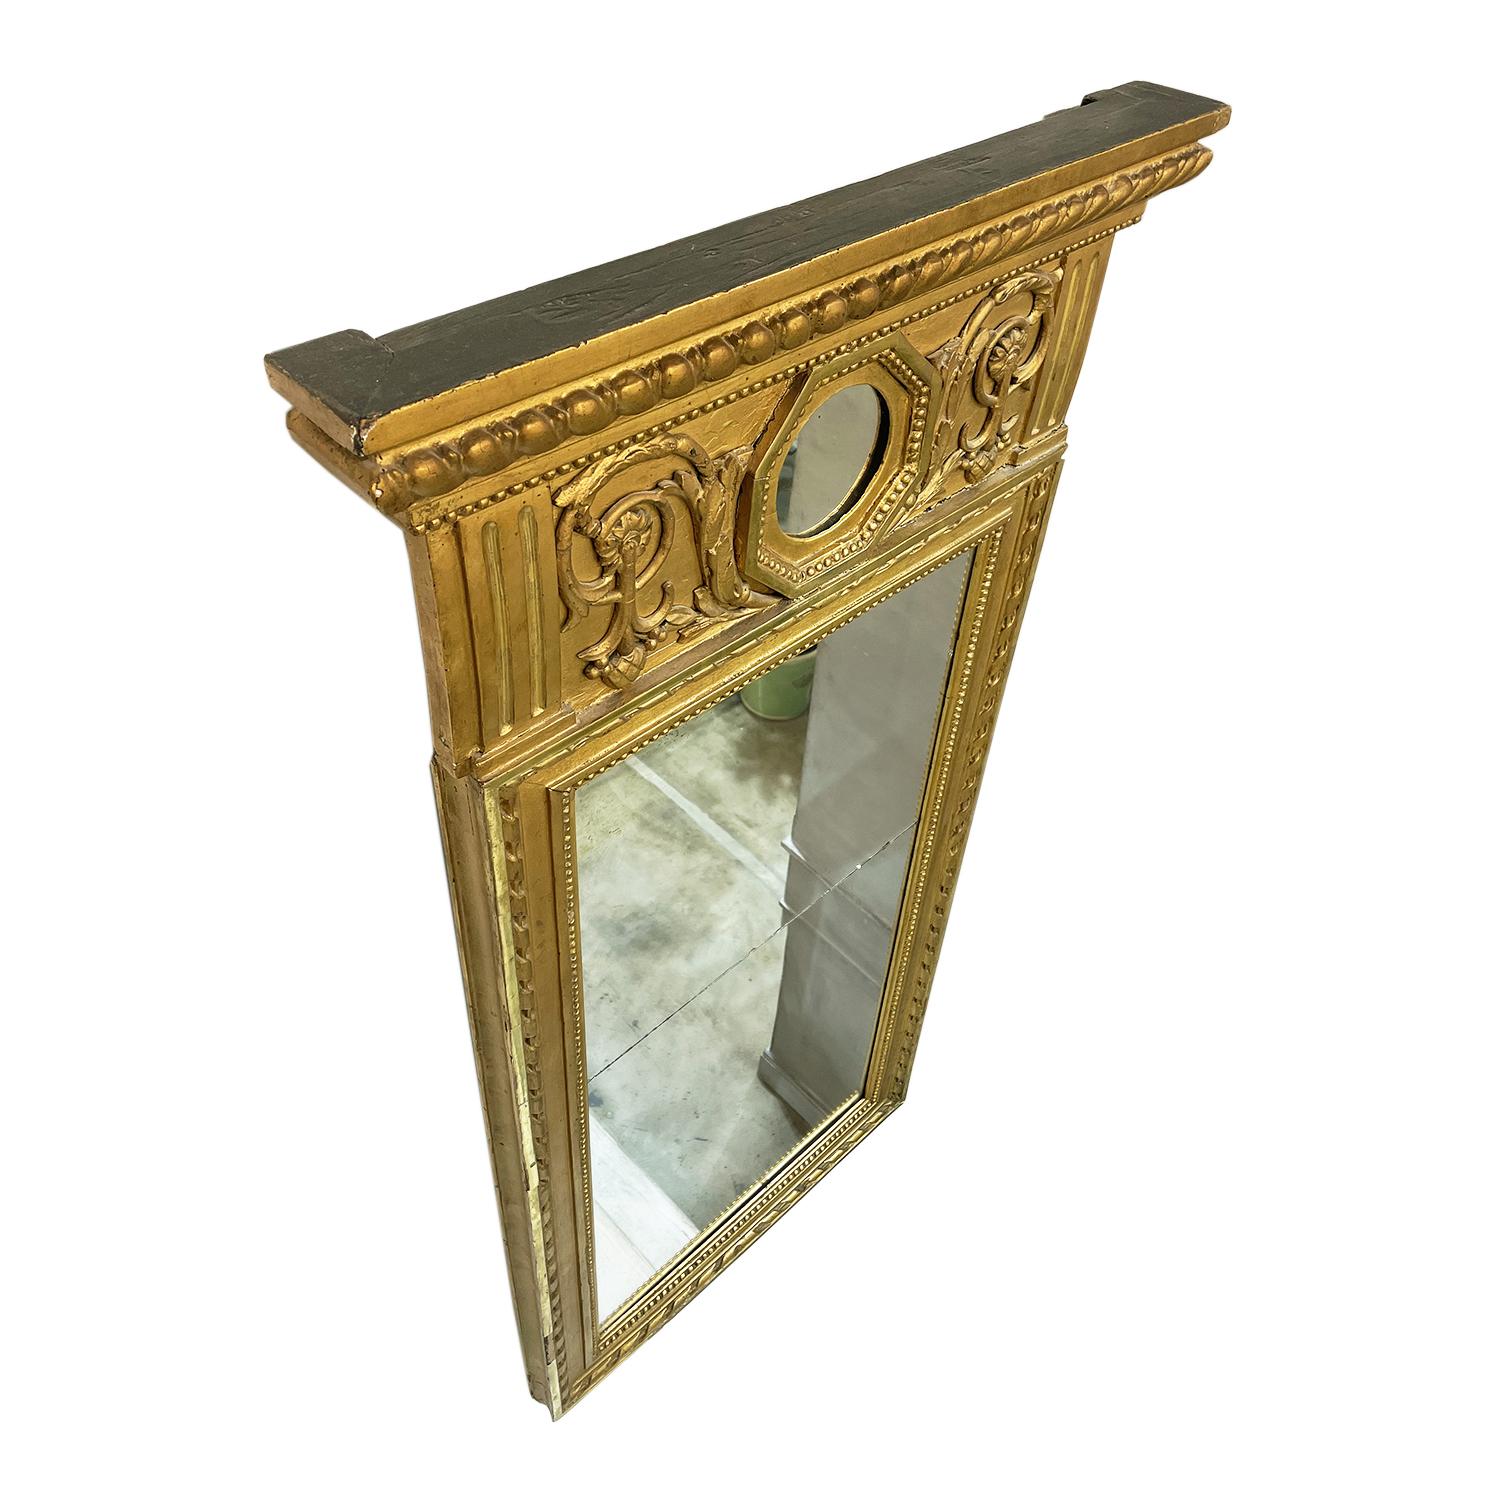 A gold, 19th century Swedish Gustavian wall mirror made of handcrafted gilded Pinewood, in good condition. The antique Scandinavian mirror is particularized with medallion and it is consisting its original mirrored glass. Wear consistent with age